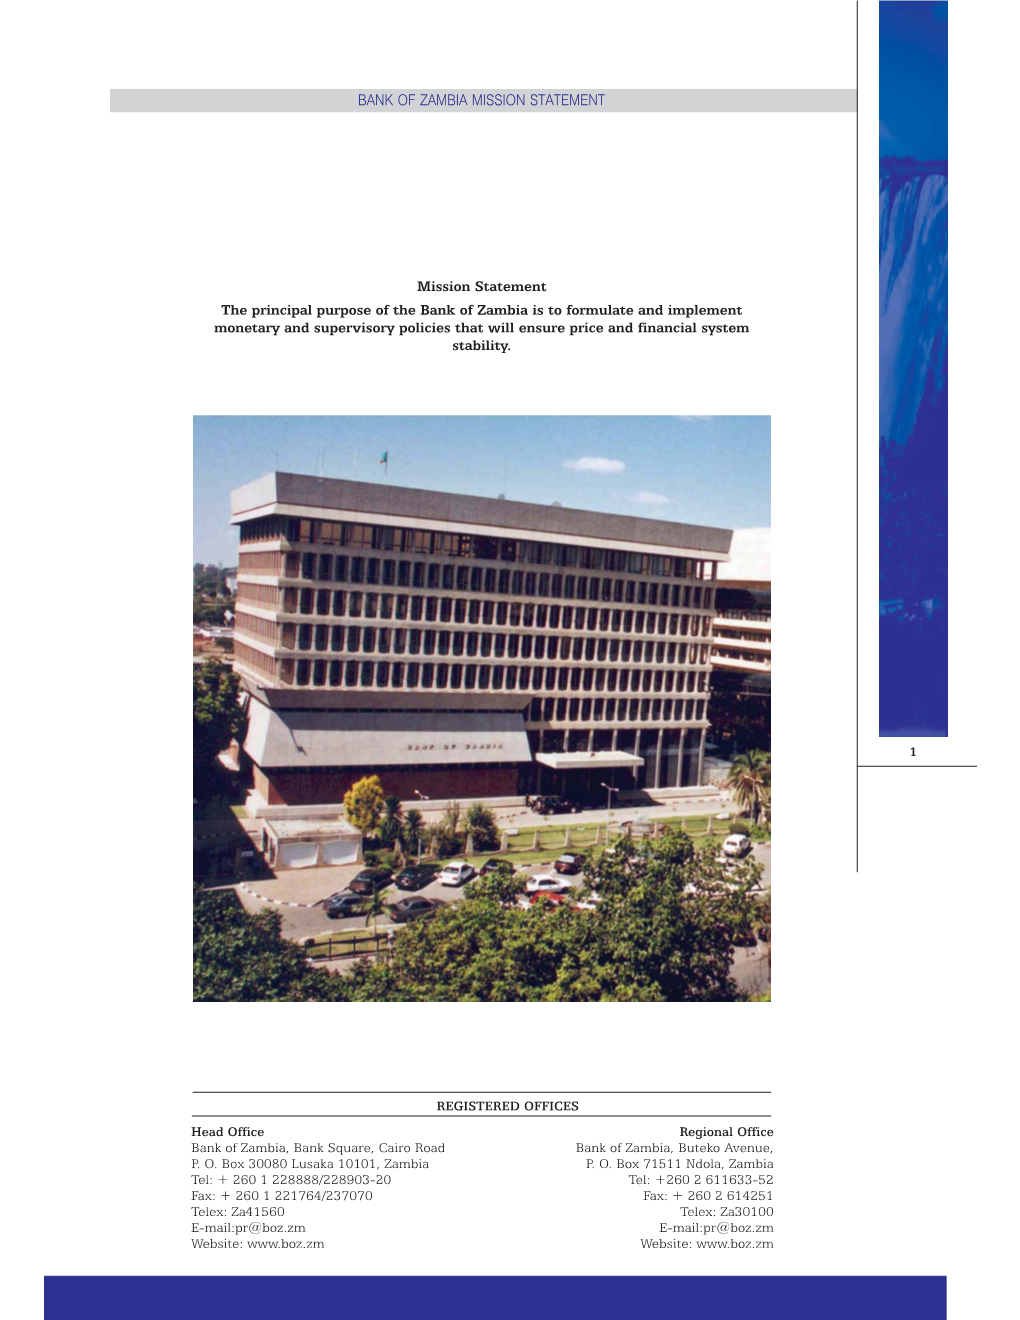 Bank of Zambia 2004 Annual Report